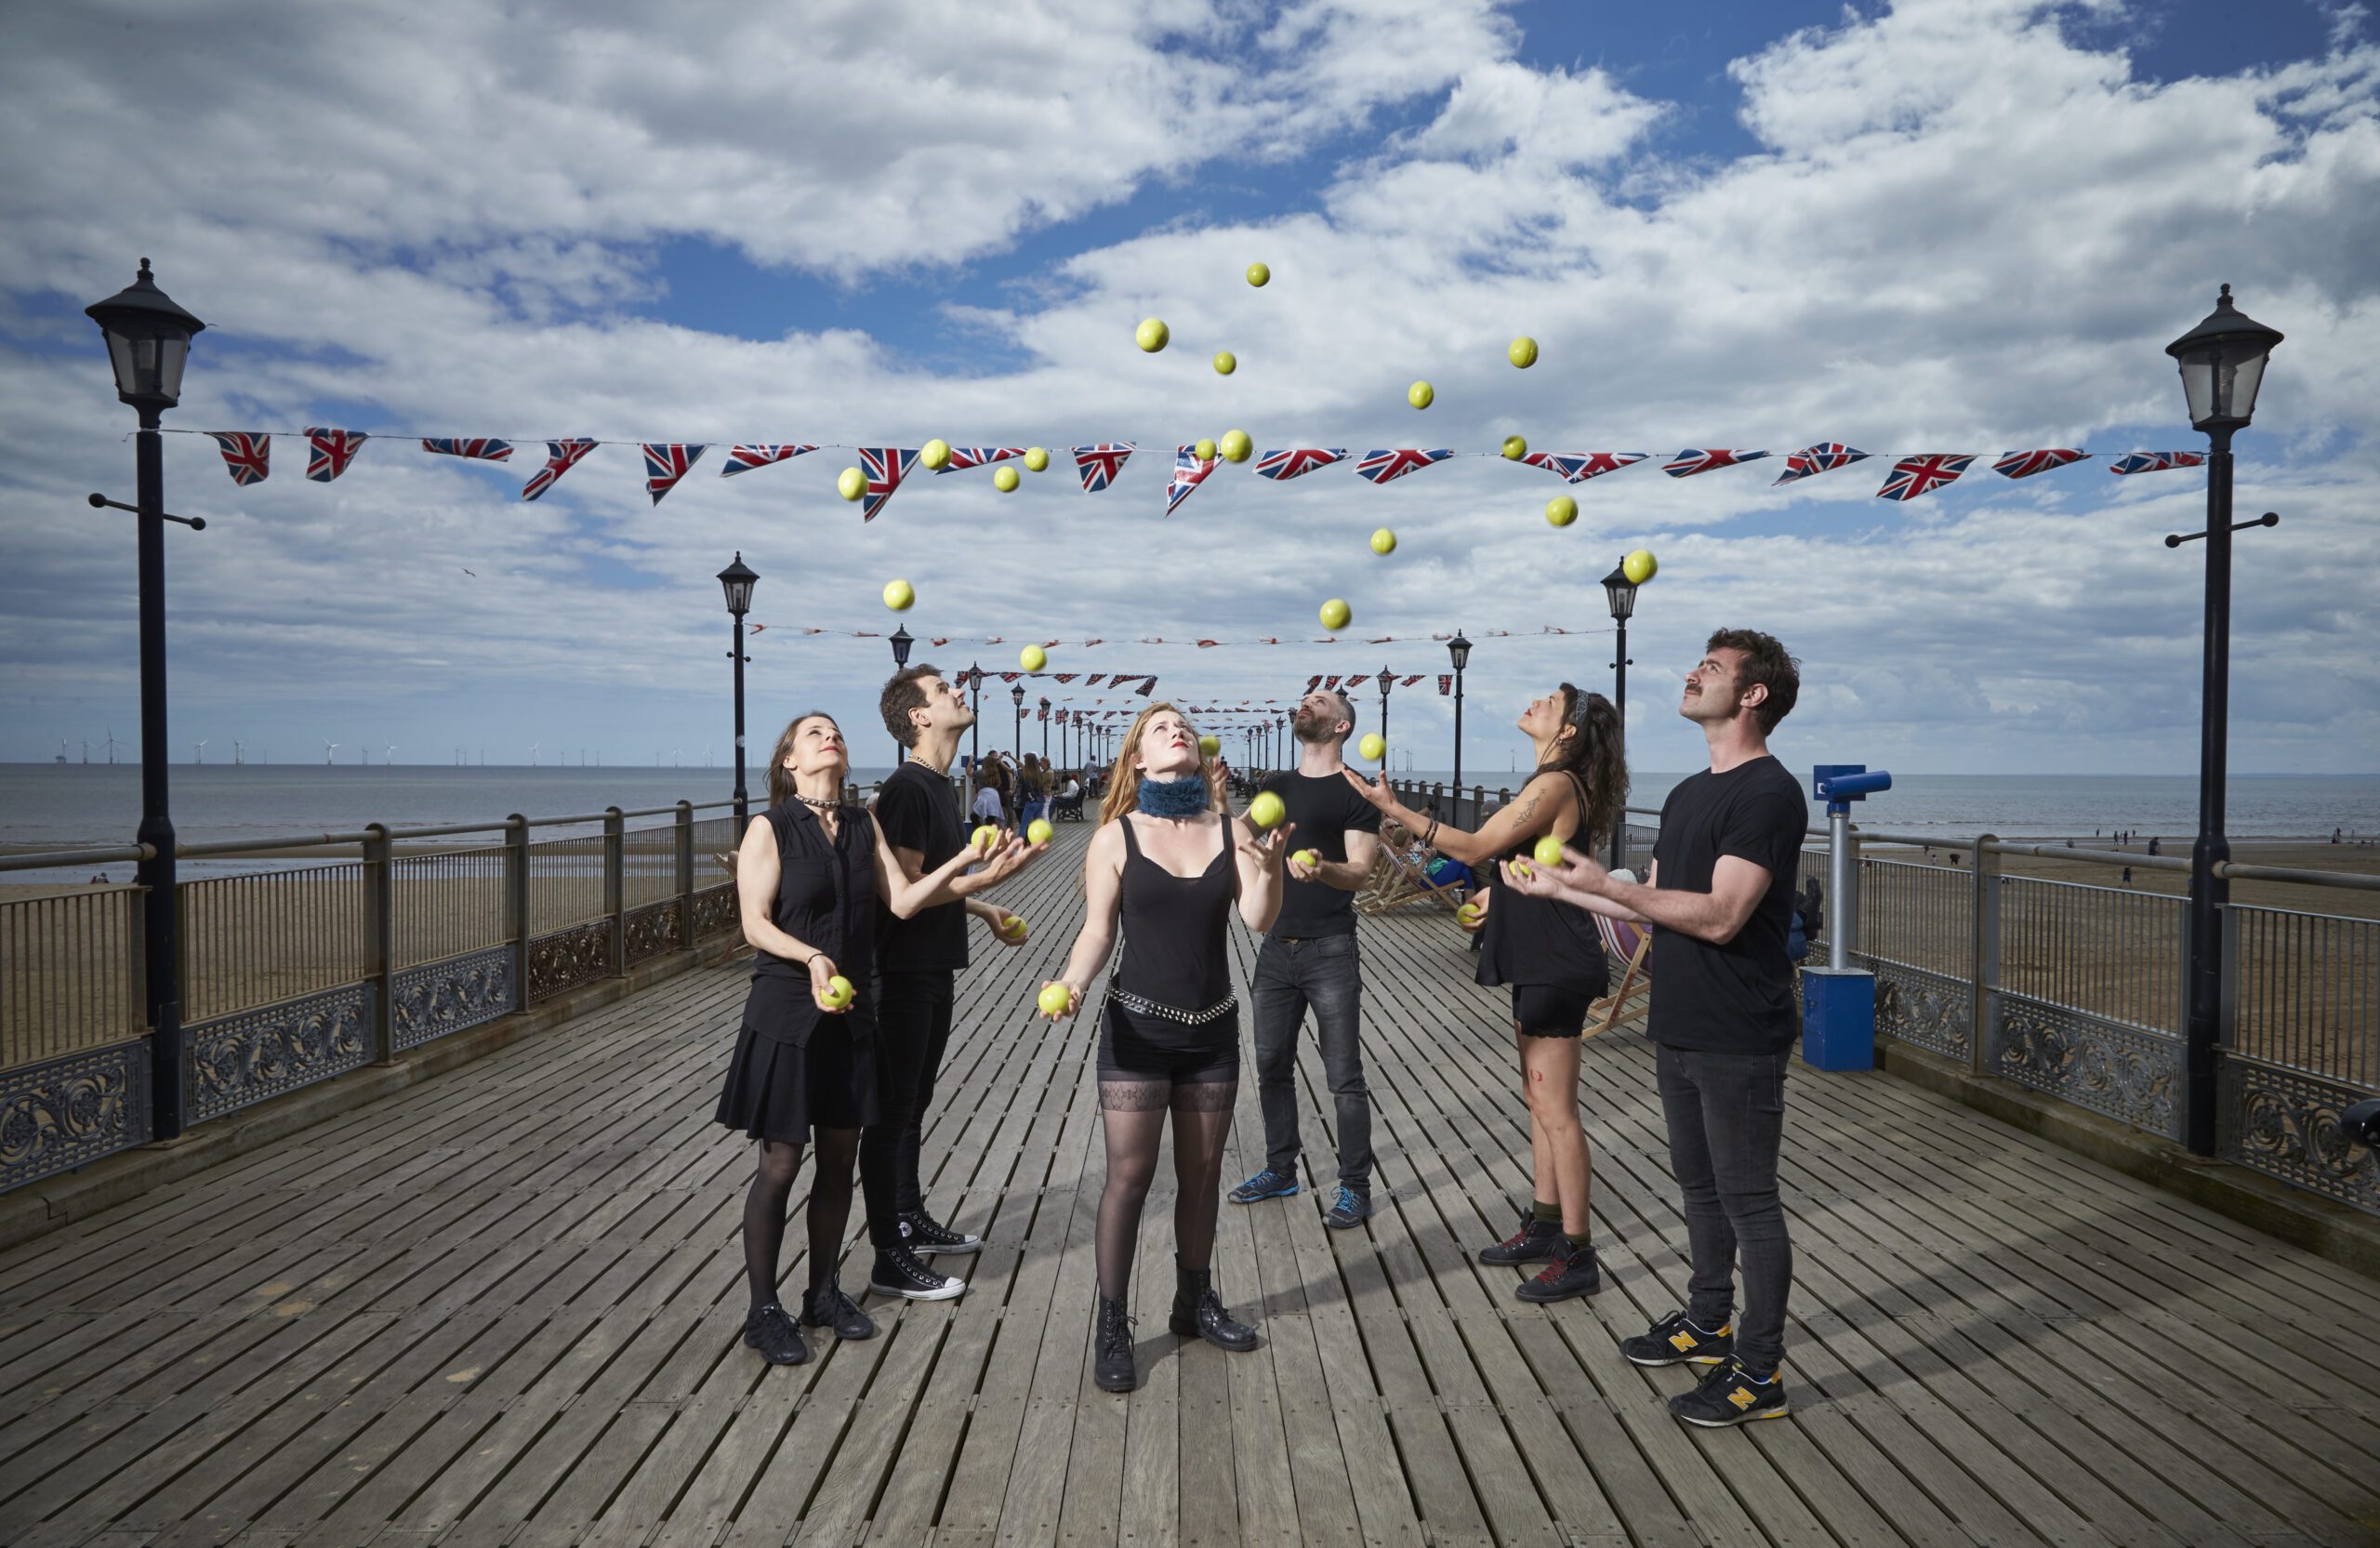 six people are juggling balls high into the air on a sea pier with bunting moving in the wind. The sky is mottled with clouds.